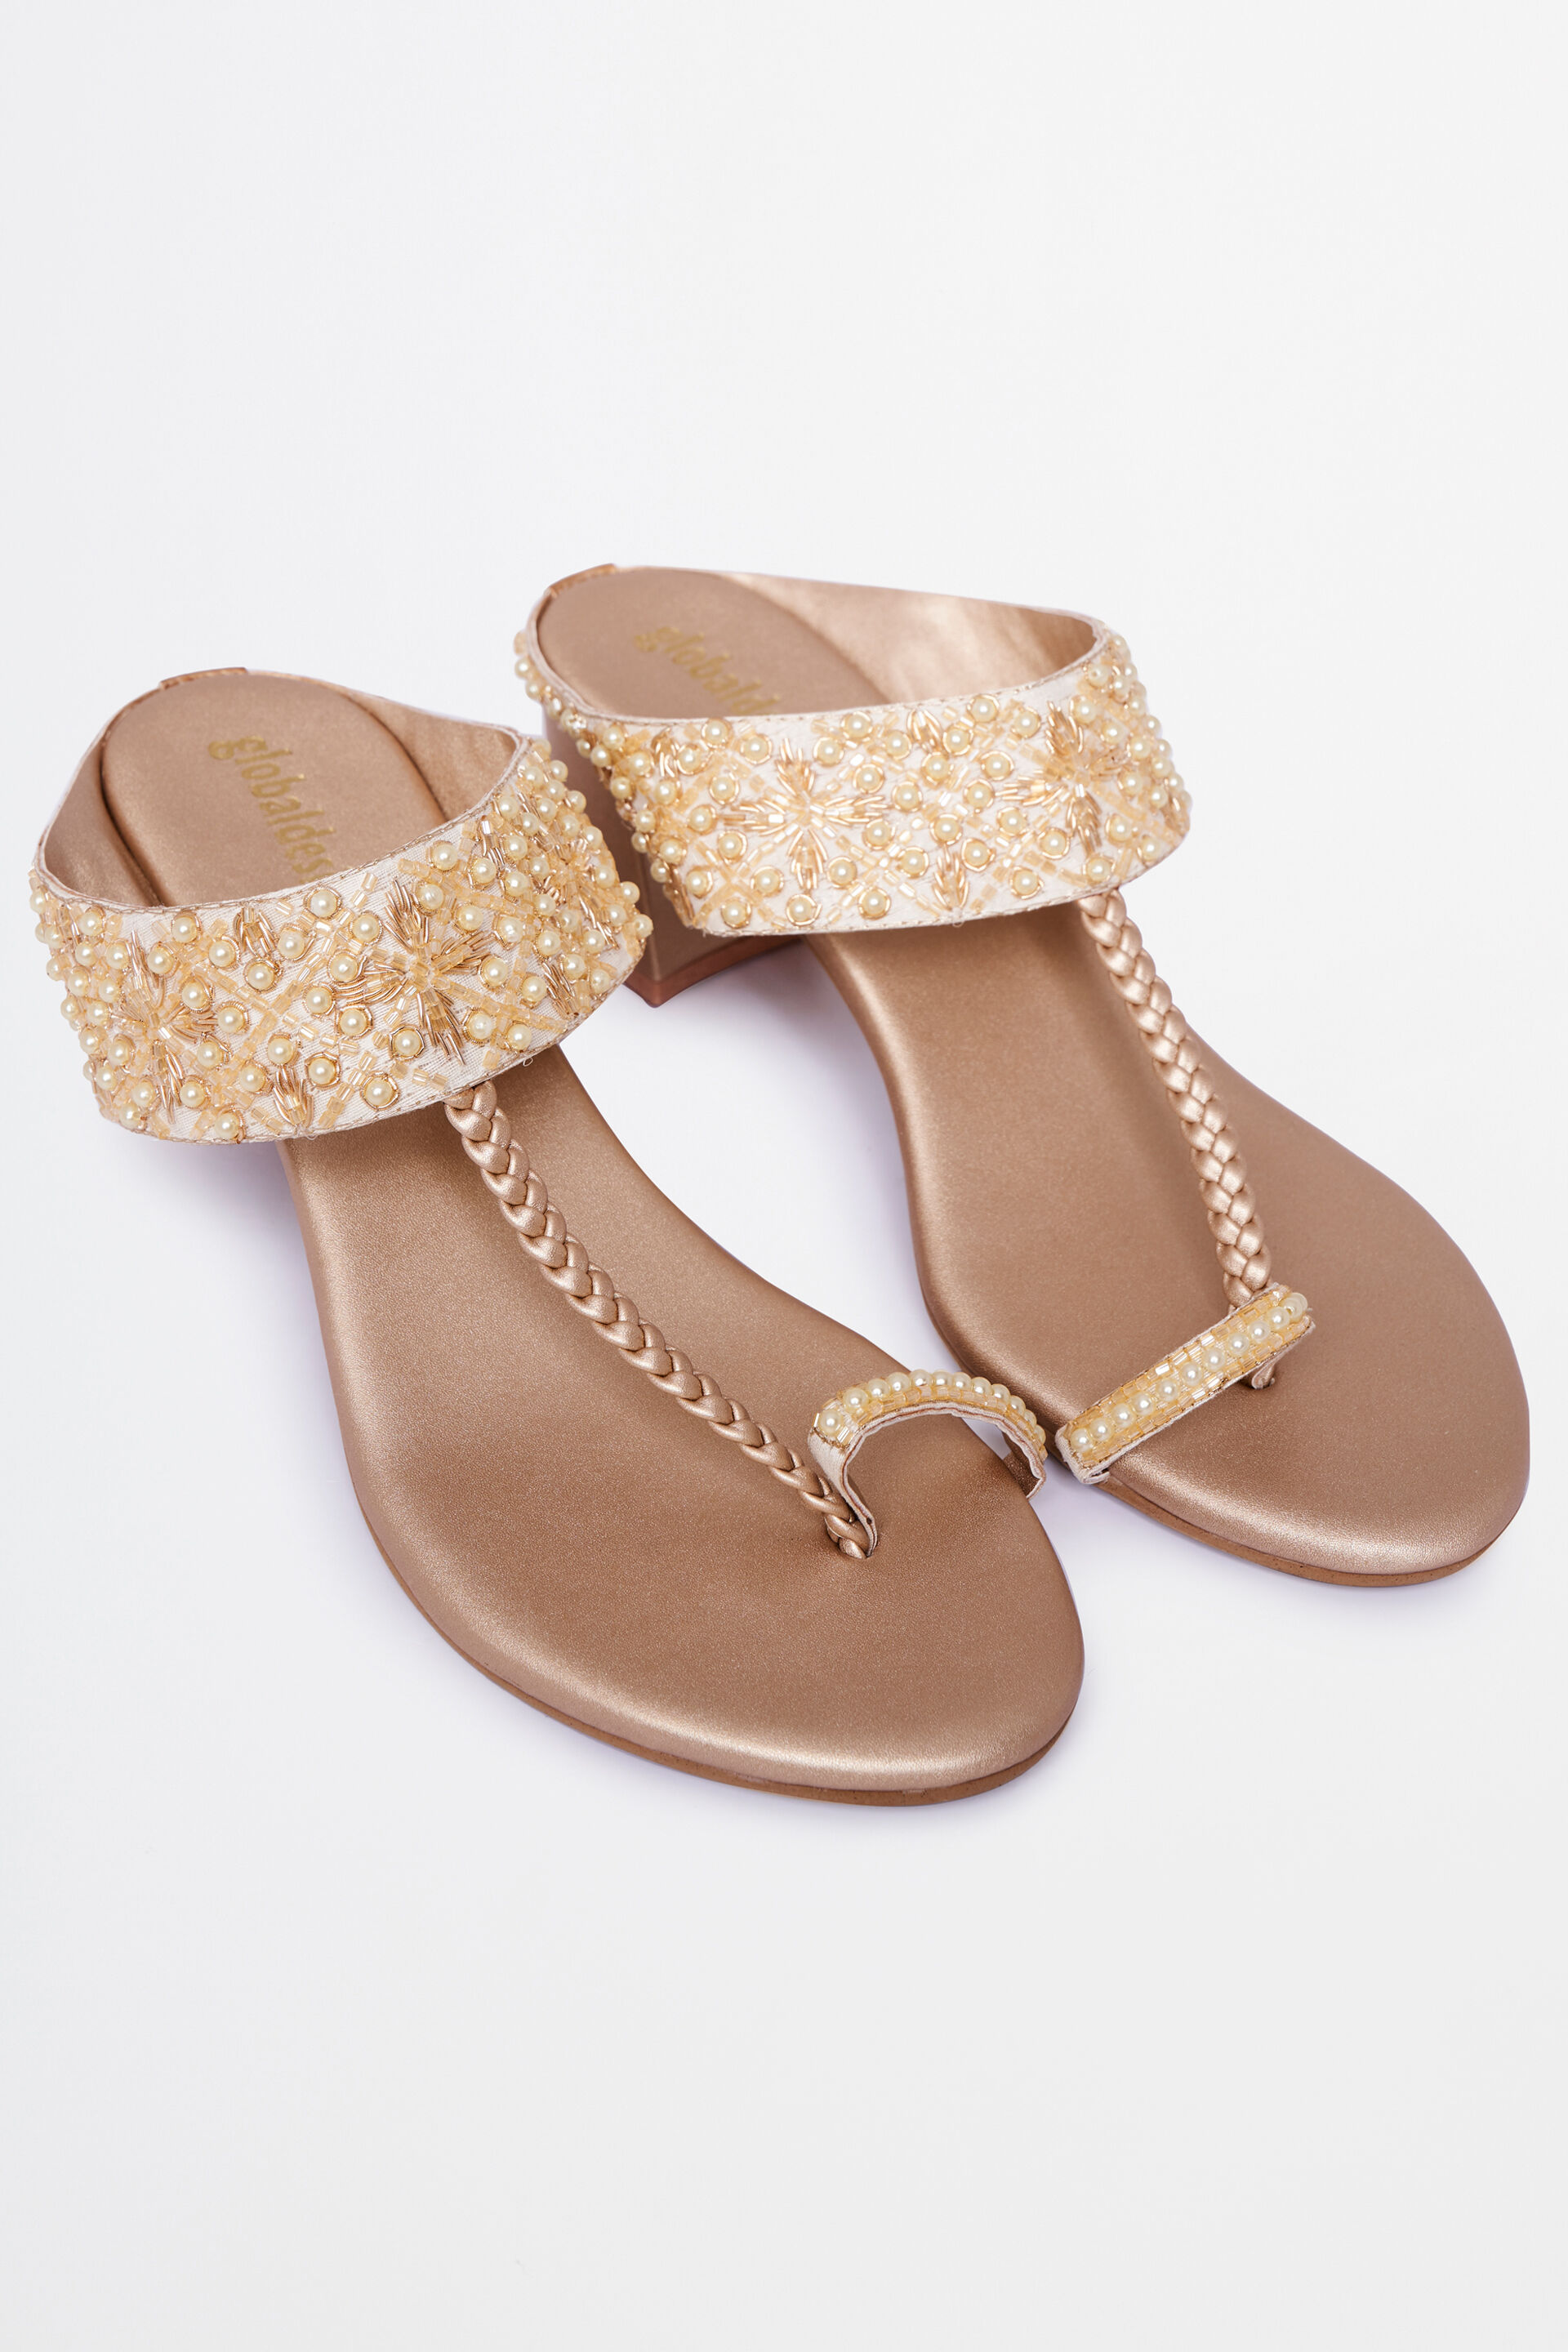 Buy Sagar Golden Rexin Sandals for Girls and Women Specially Made for  Marriage (4) (5) at Amazon.in